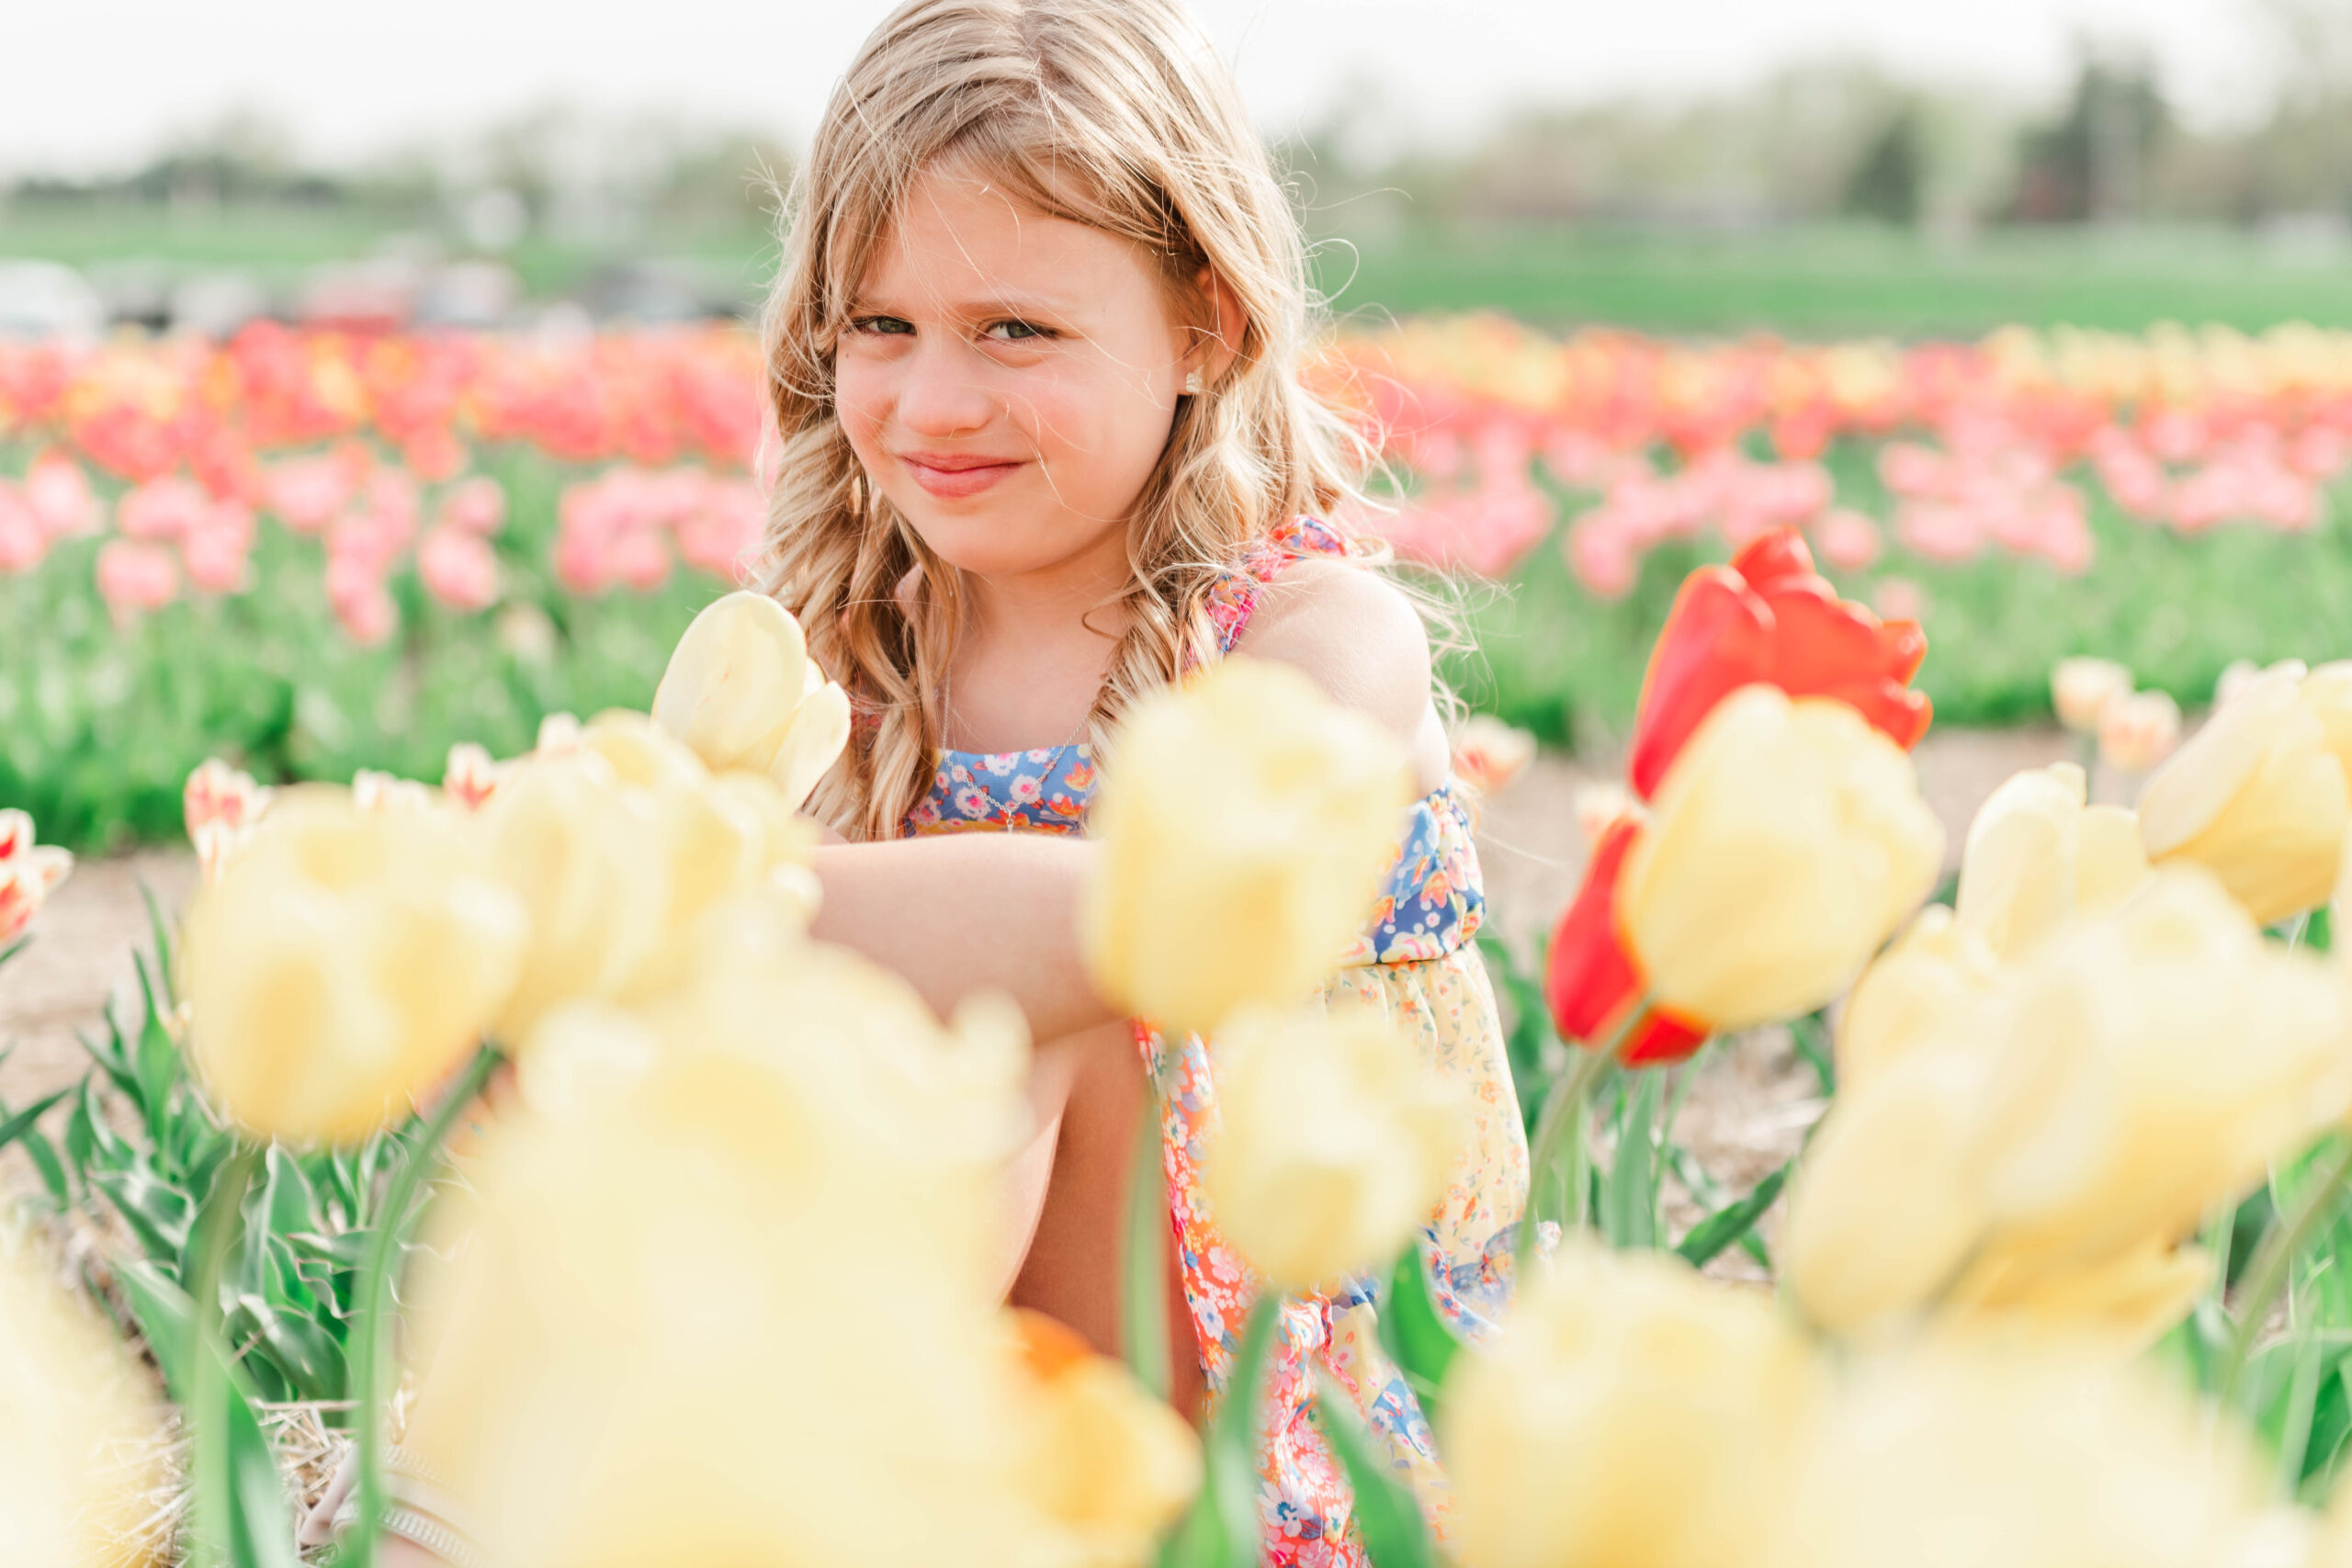 beautiful girl sitting in a tulip field smiling with colors surrounding her